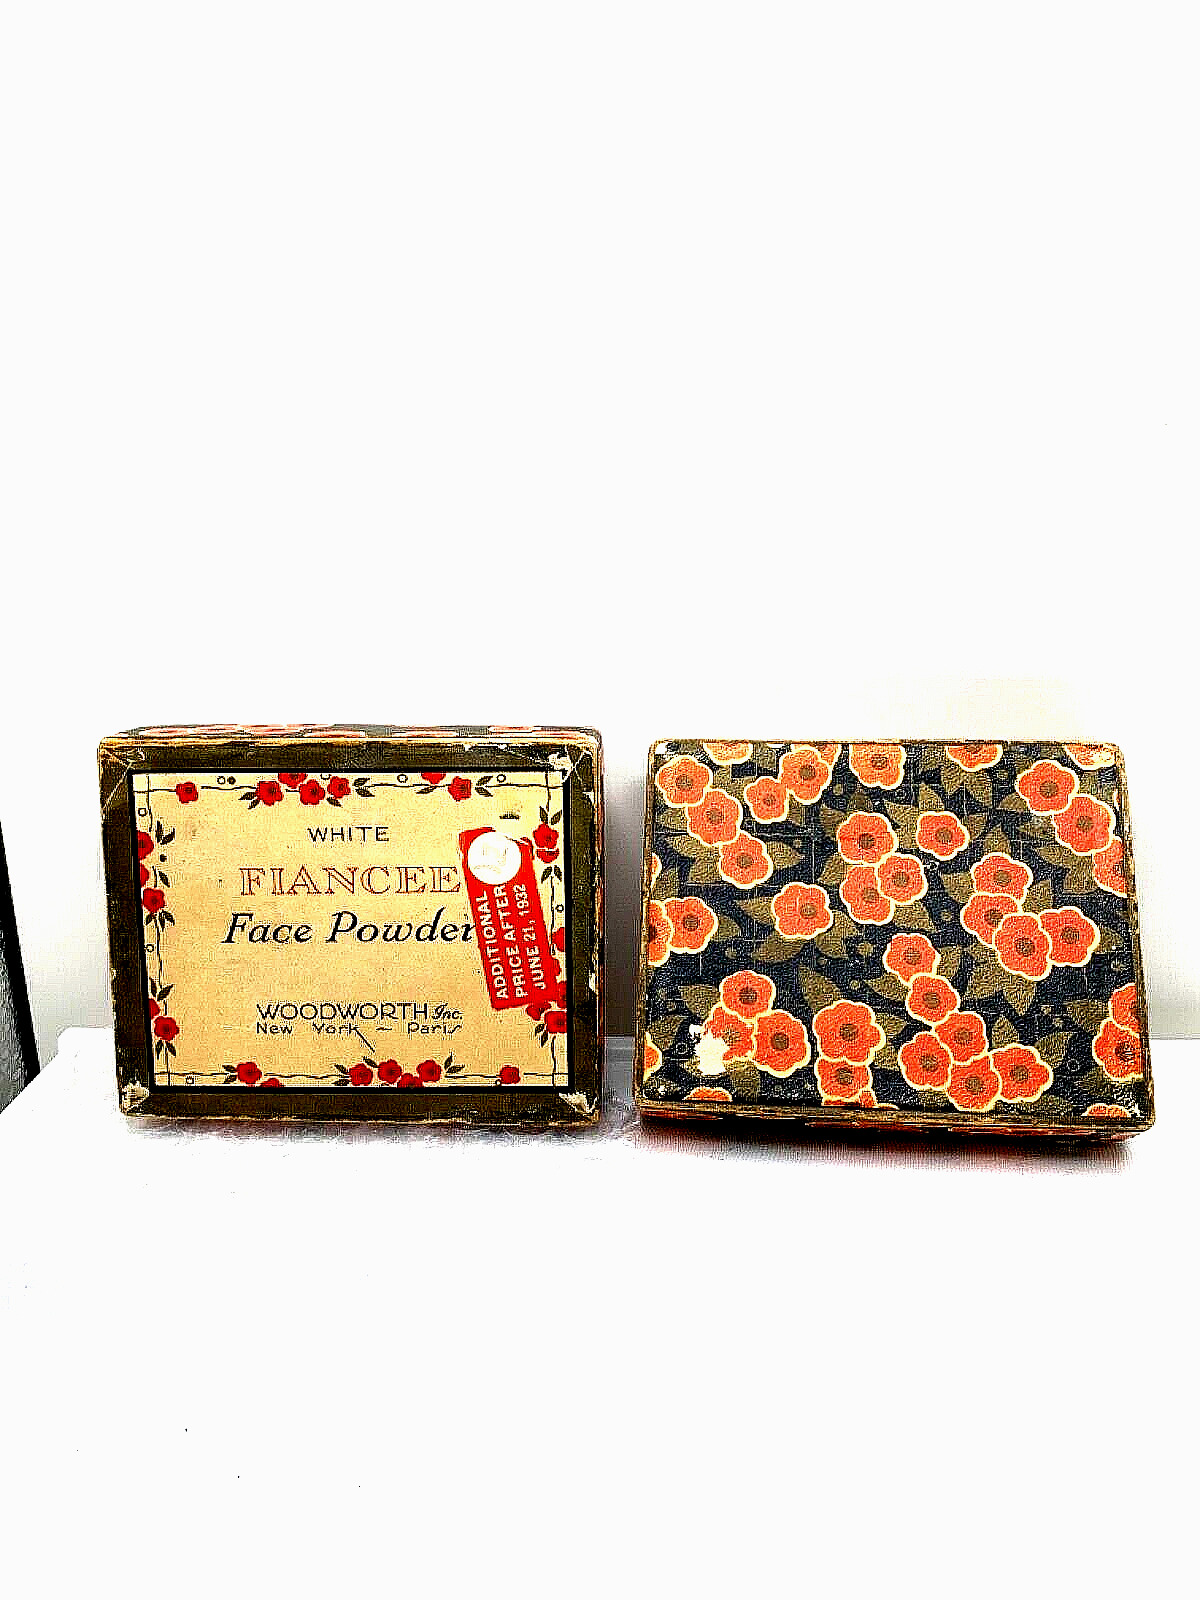 Beautiful   Antique face powder box.   Fiancée by Woodworth.   1912.